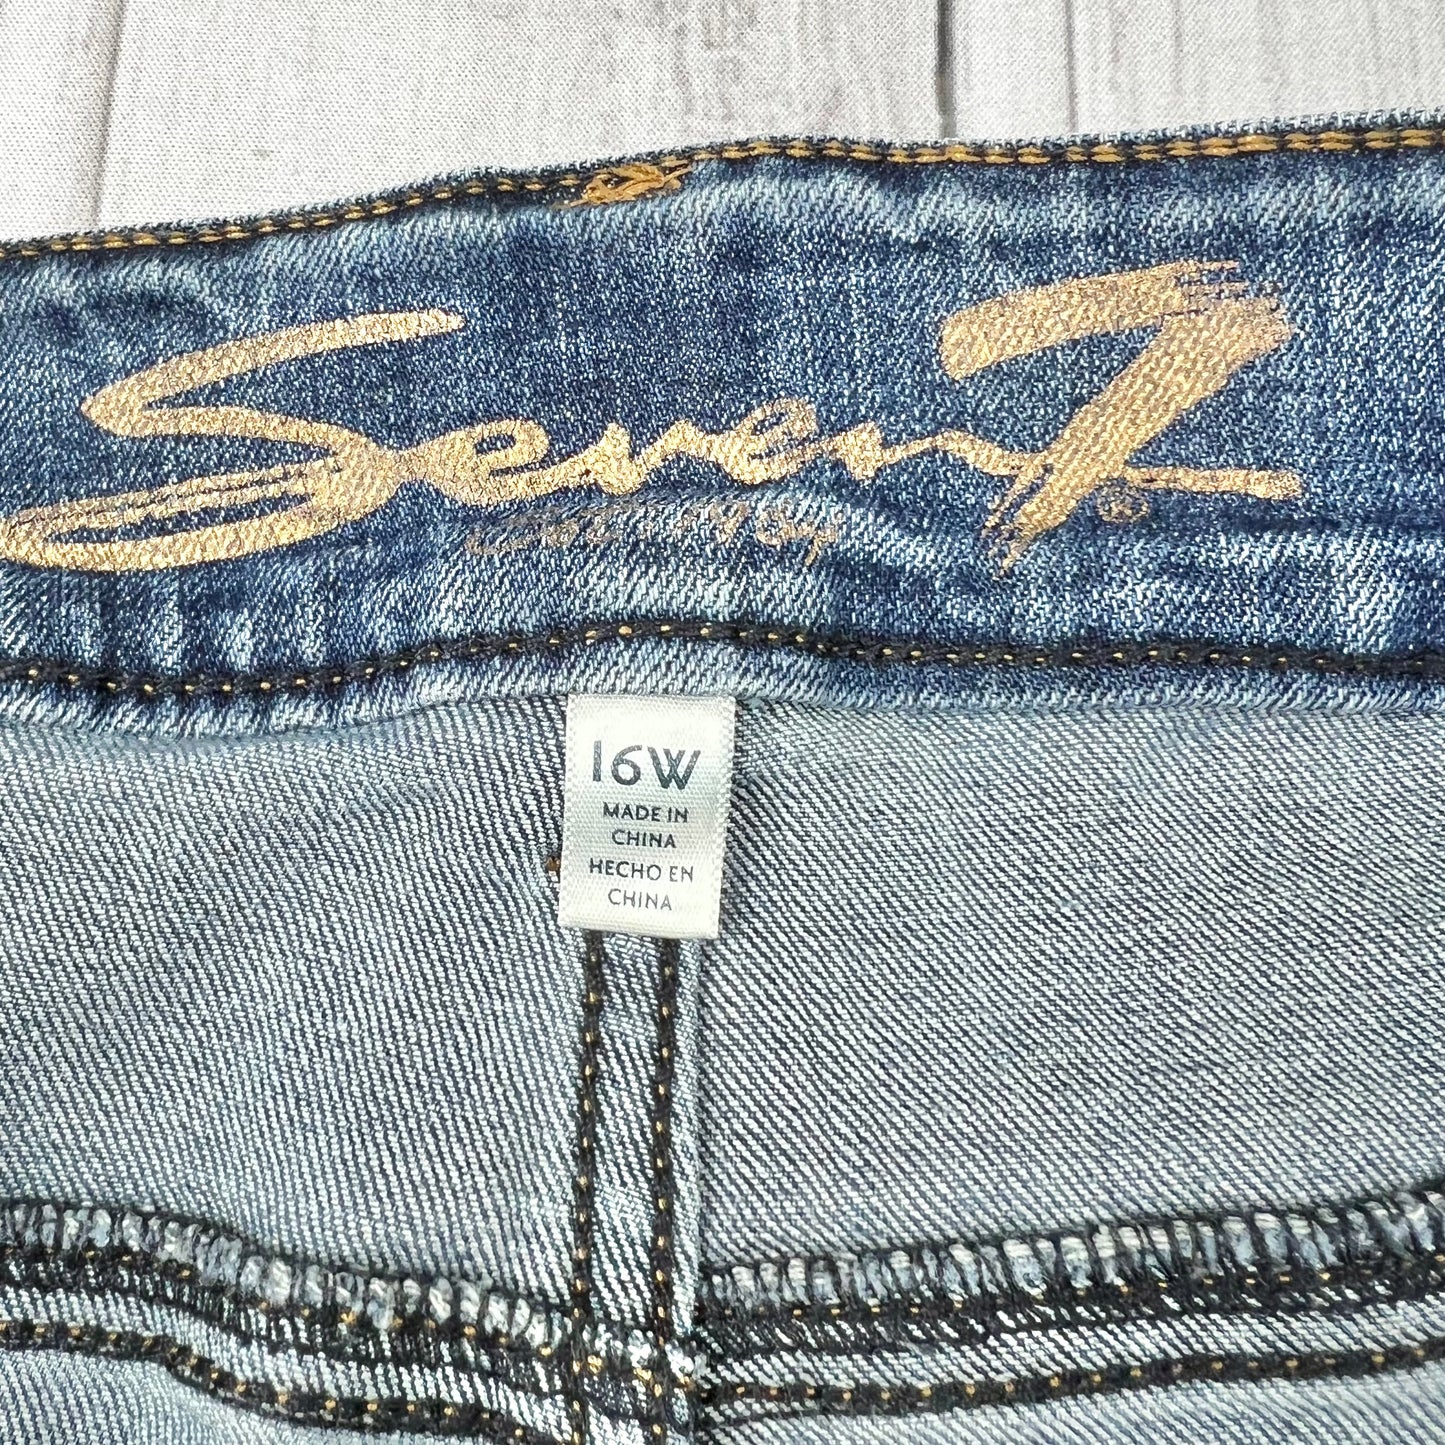 Blue Denim Jeans Straight By Seven 7, Size: 16w